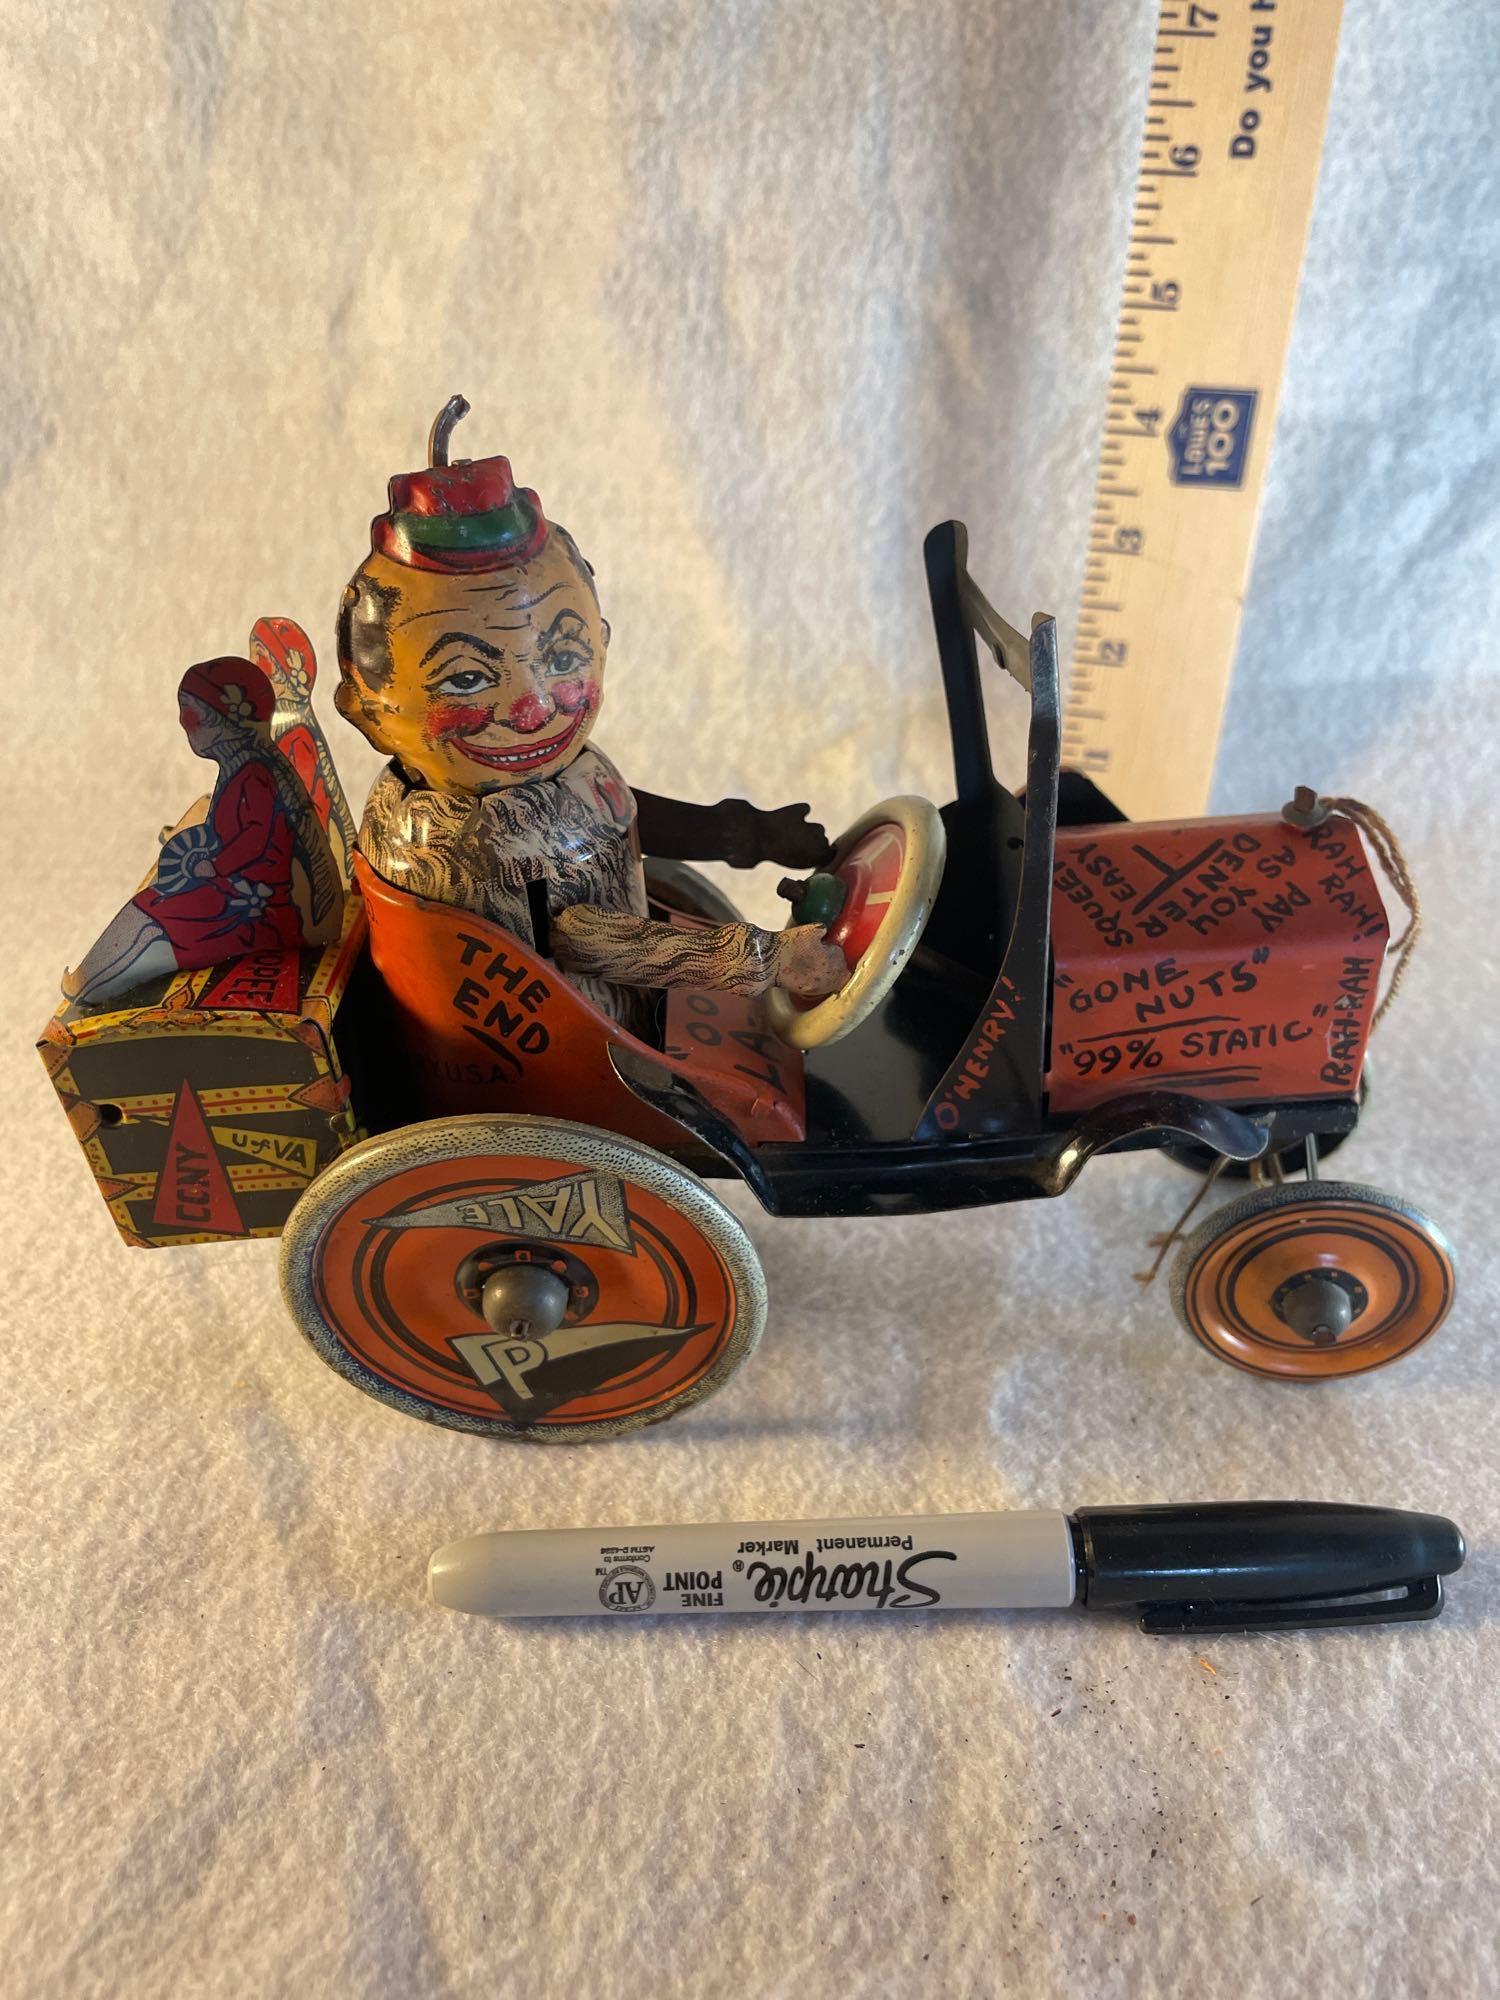 1920s Louis Marx Tin Whoopee College Crazy Car